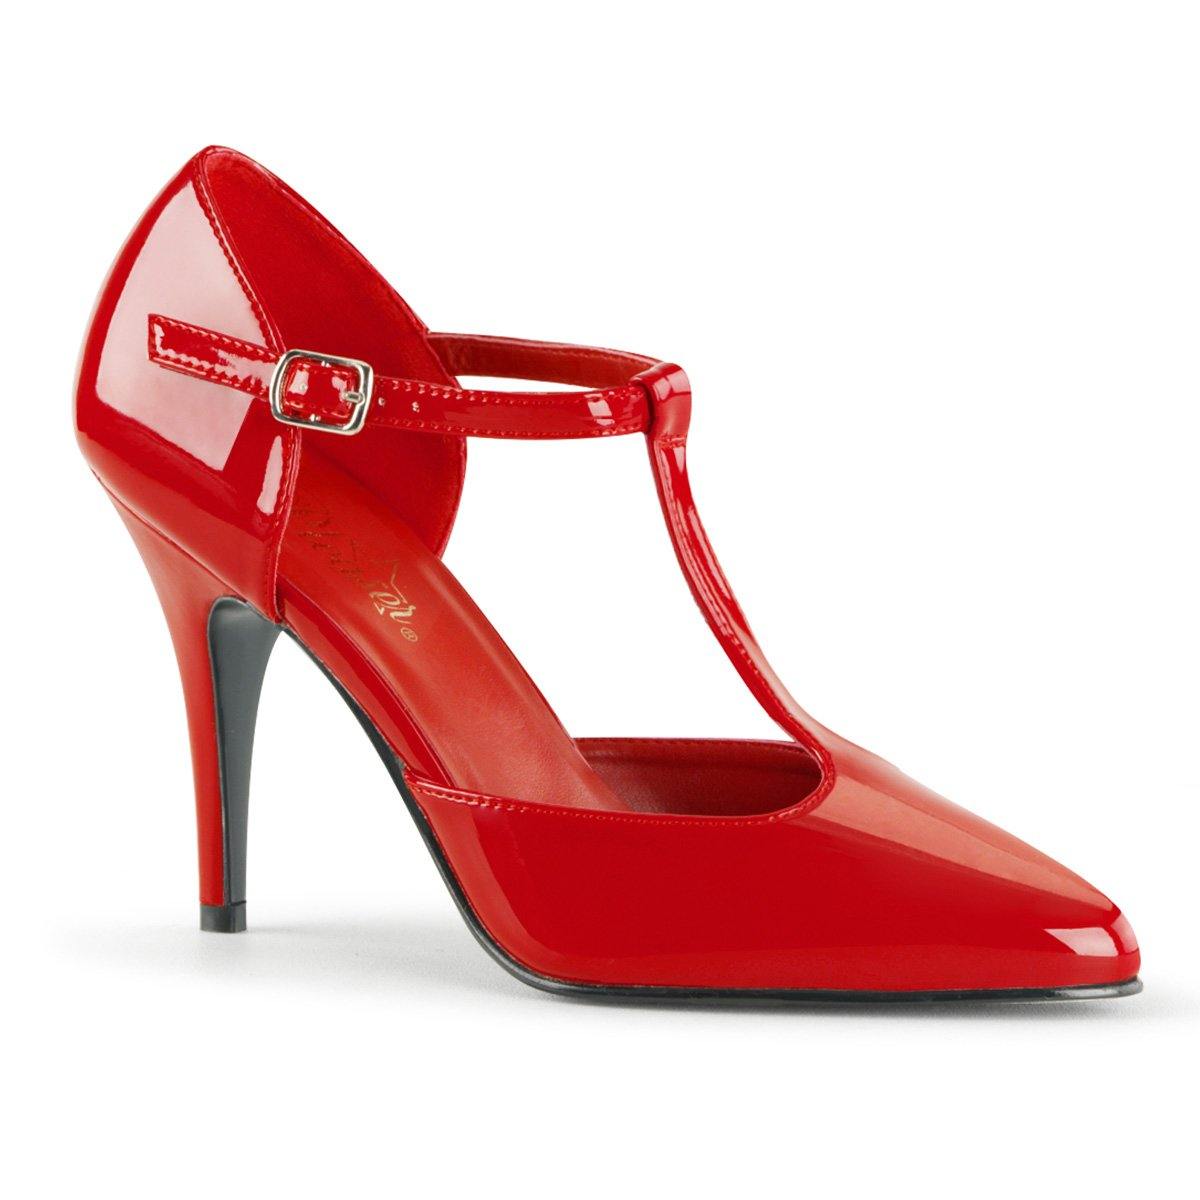 Vanity T-Strap d'Orsay Pump in Patent Red - pinupgirlclothing.com